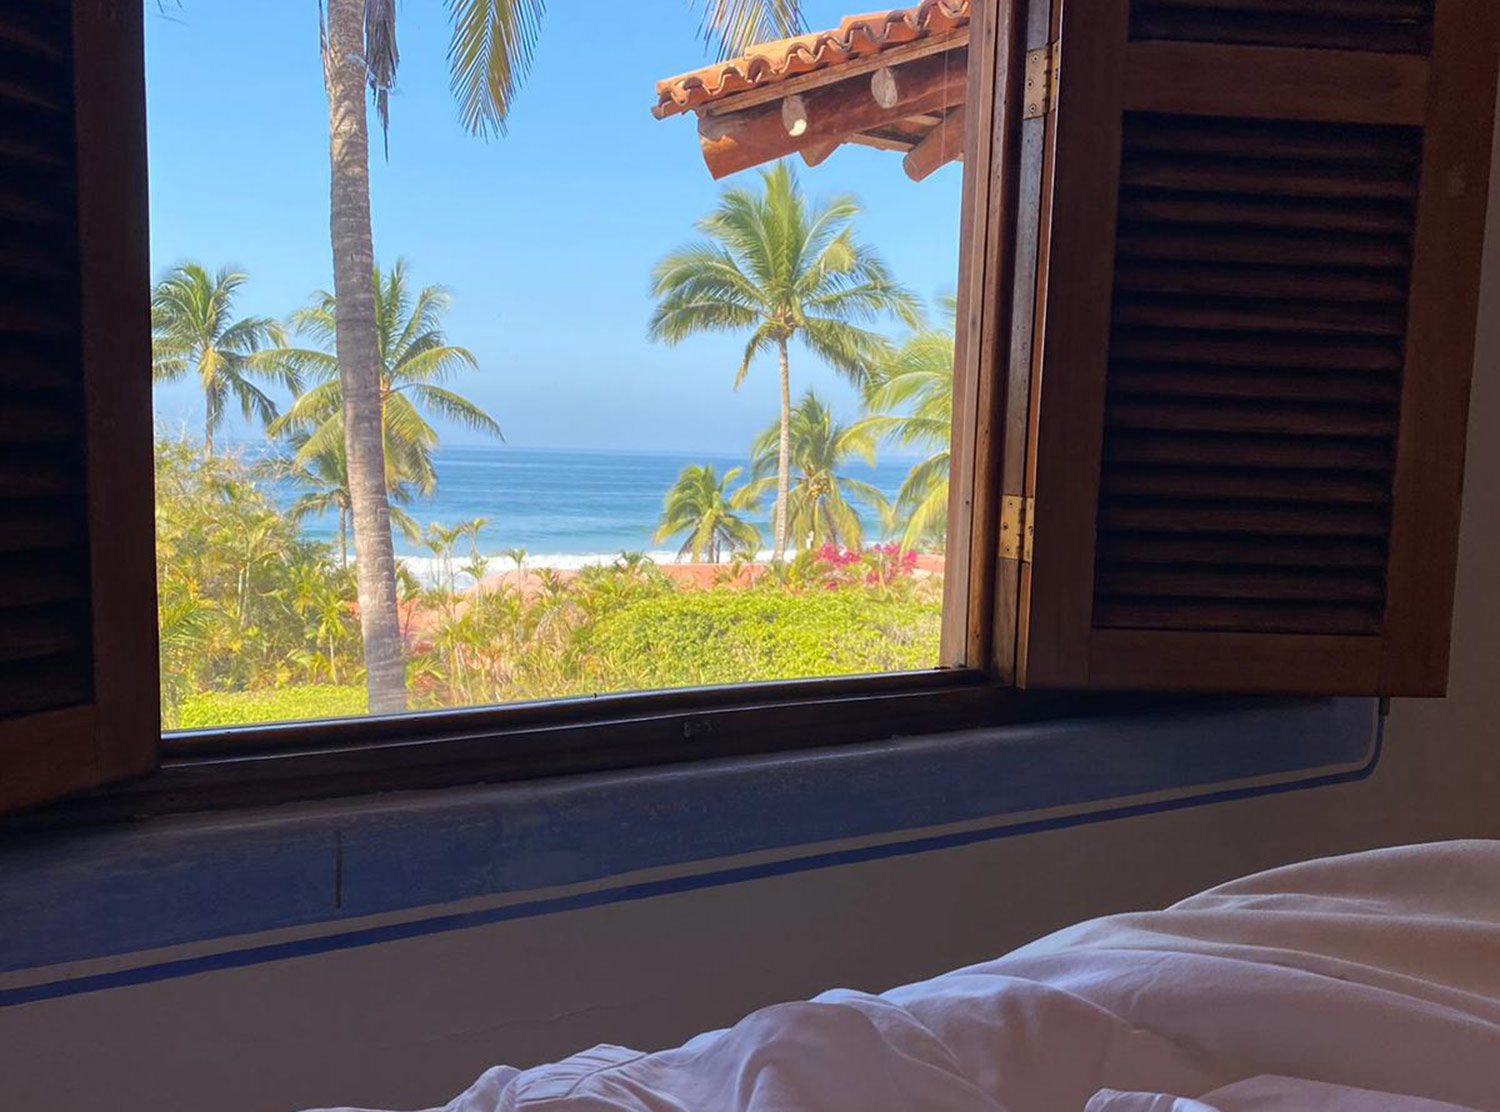 Las Alamandas The best views to wake up to in the morning!